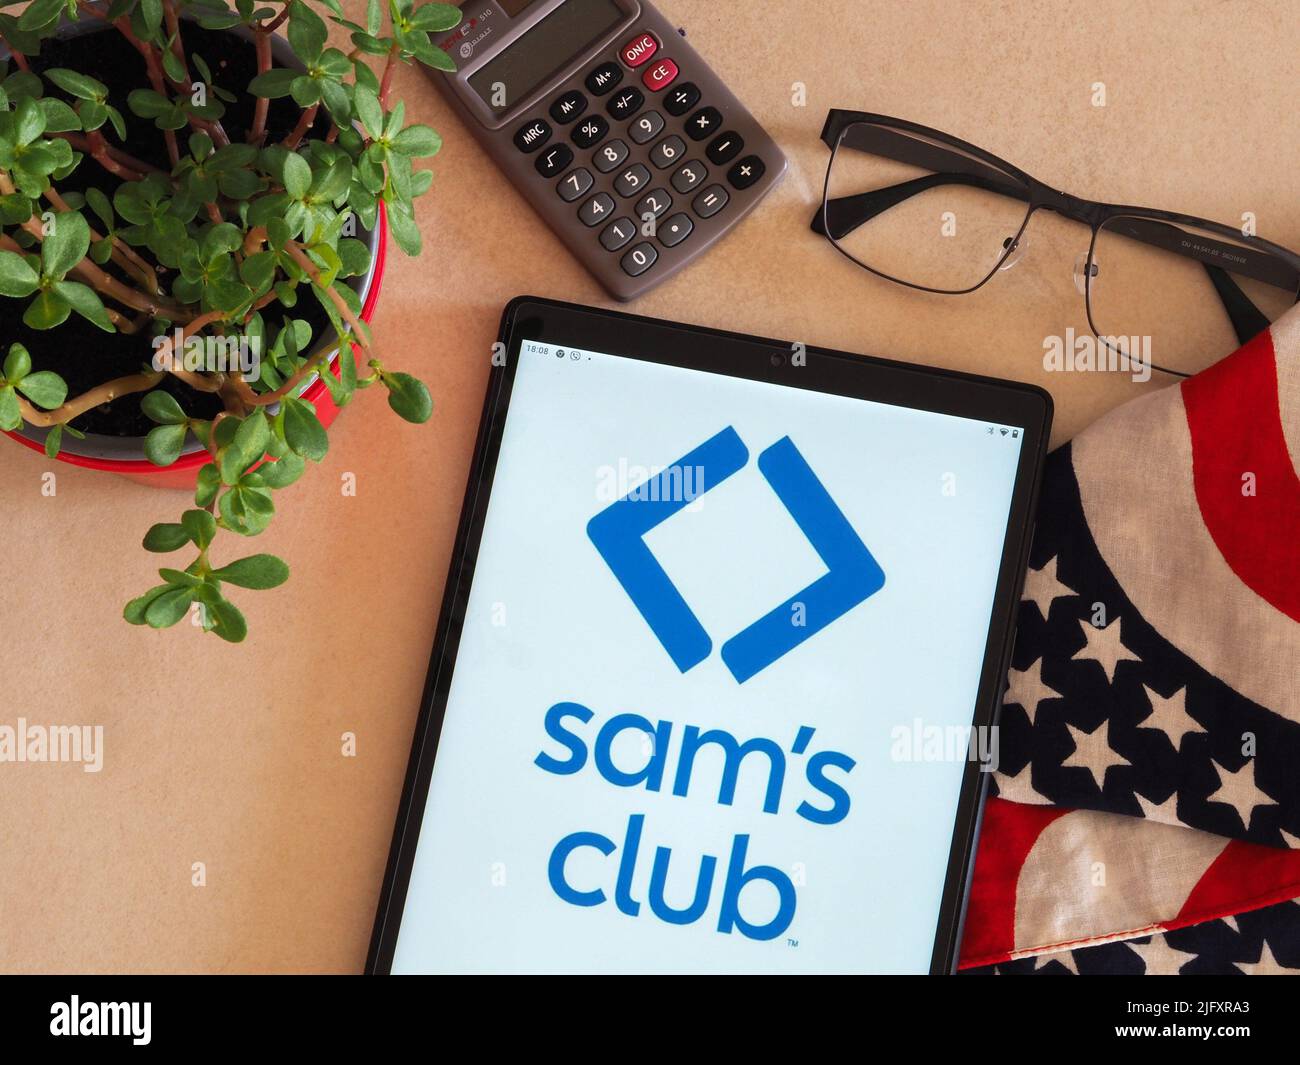 Sams club logo hi-res stock photography and images - Alamy